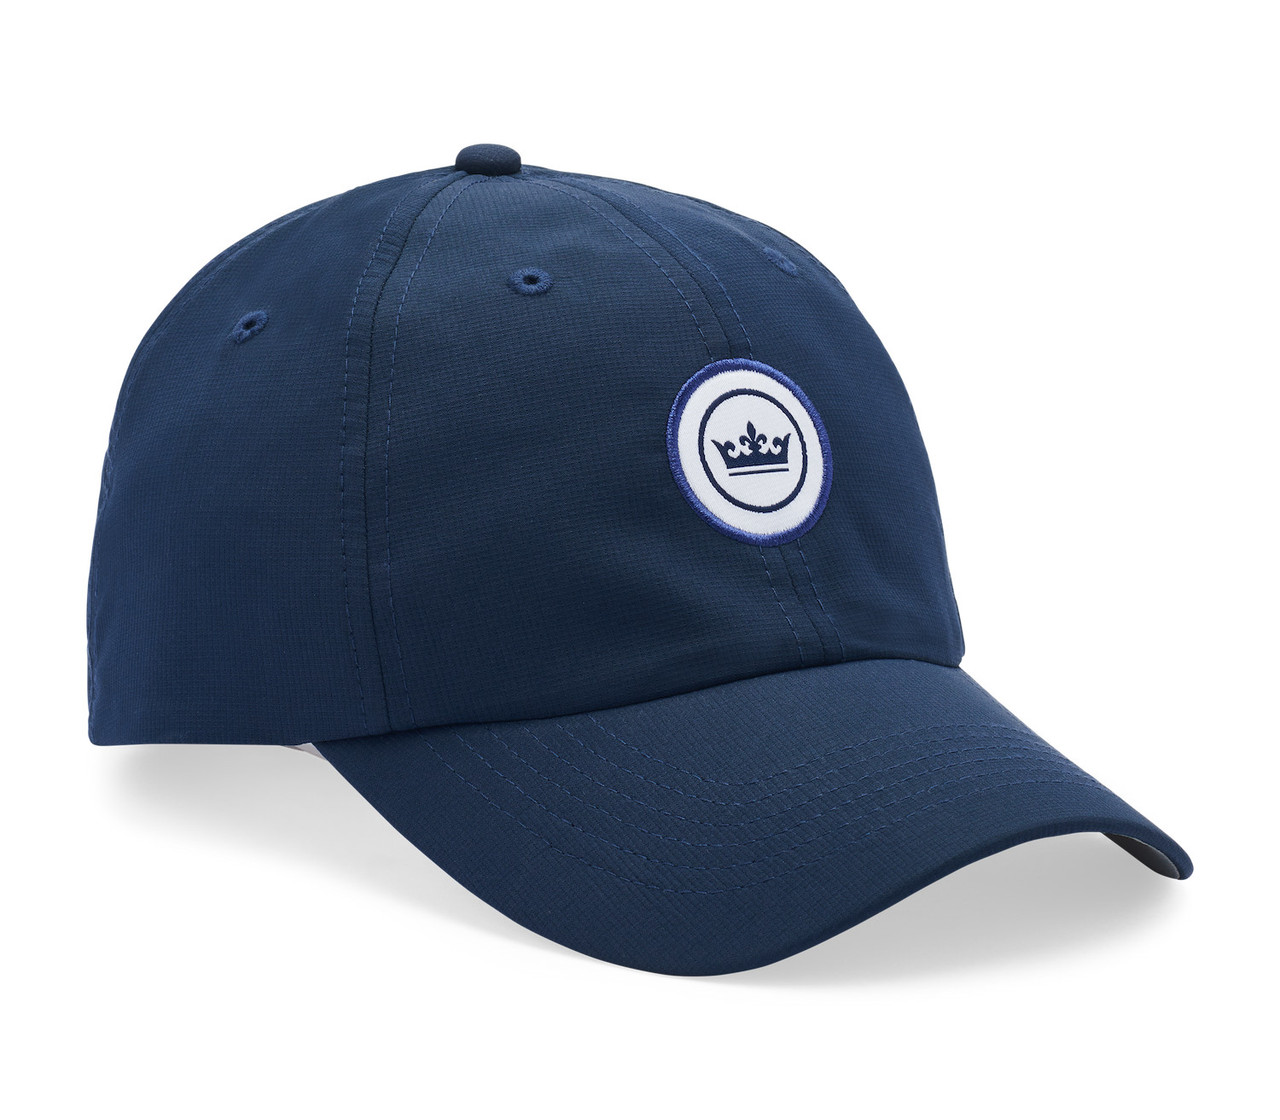 https://cdn11.bigcommerce.com/s-e3nb6xi/images/stencil/1280x1280/products/27044/136922/Crown_Seal_Hat_Navy__12424.1708985701.jpg?c=2